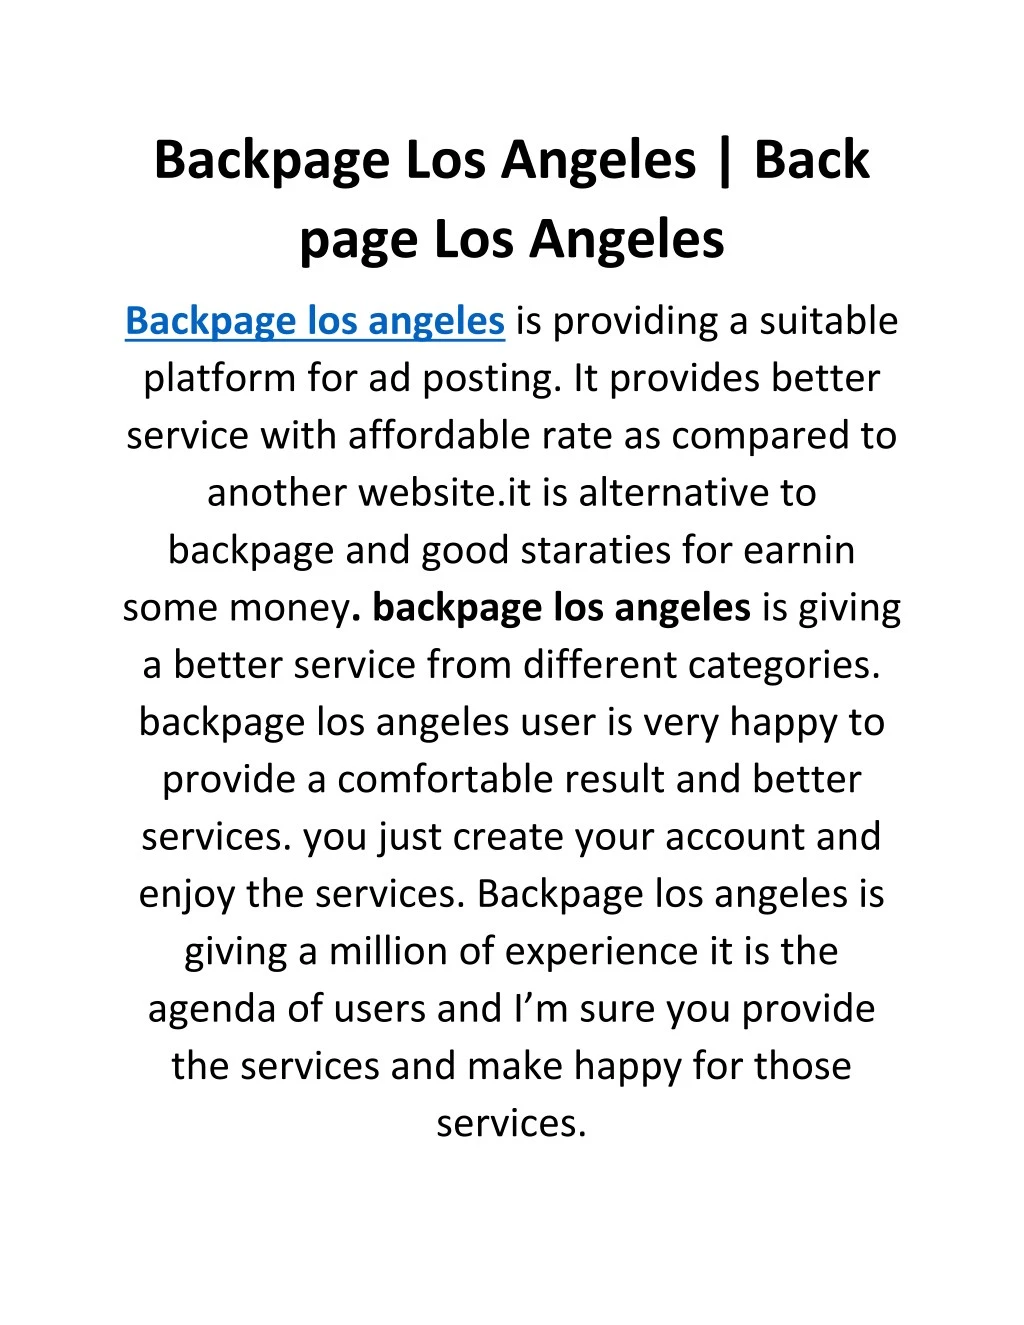 backpage los angeles back page los angeles